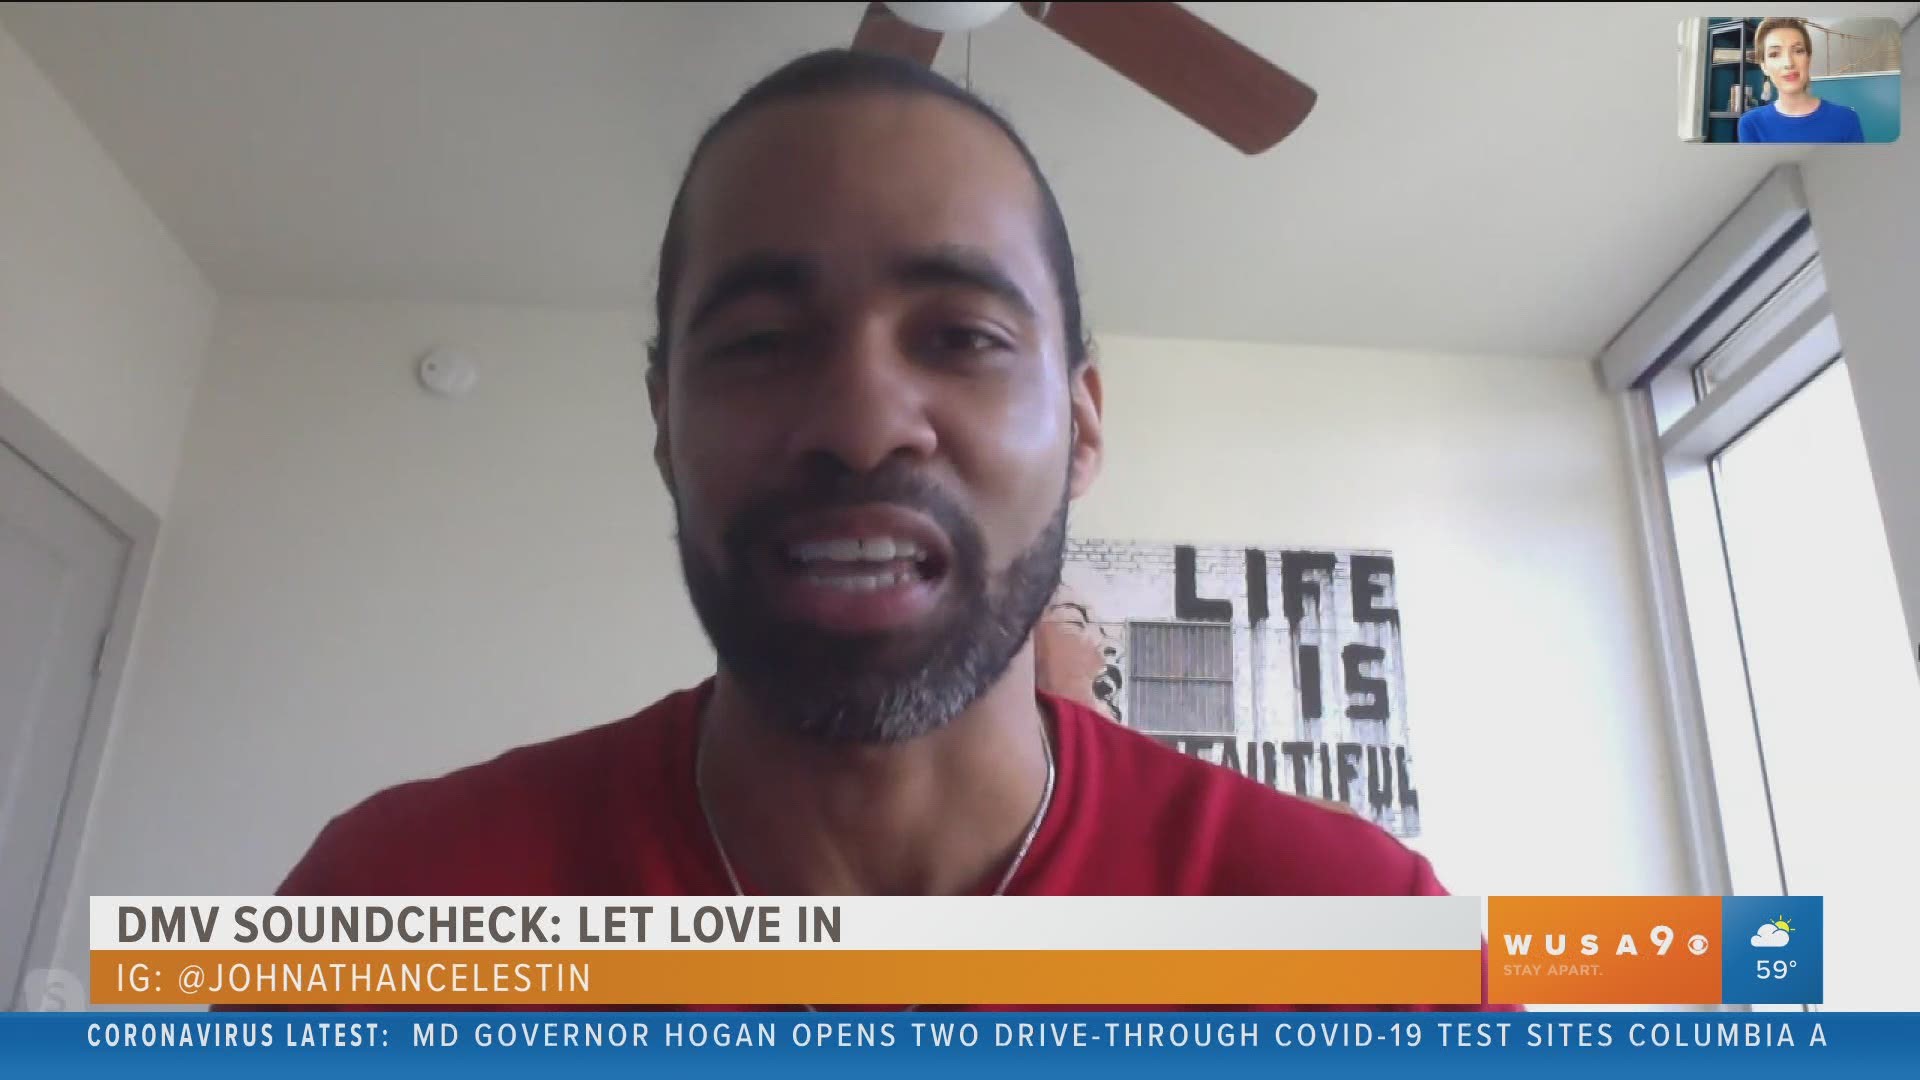 In this week's DMV Soundcheck, Johnathan Celestin sends a message of inspiration. Sponsored by the DC Office of Cable Television, Film, Music, and Entertainment.